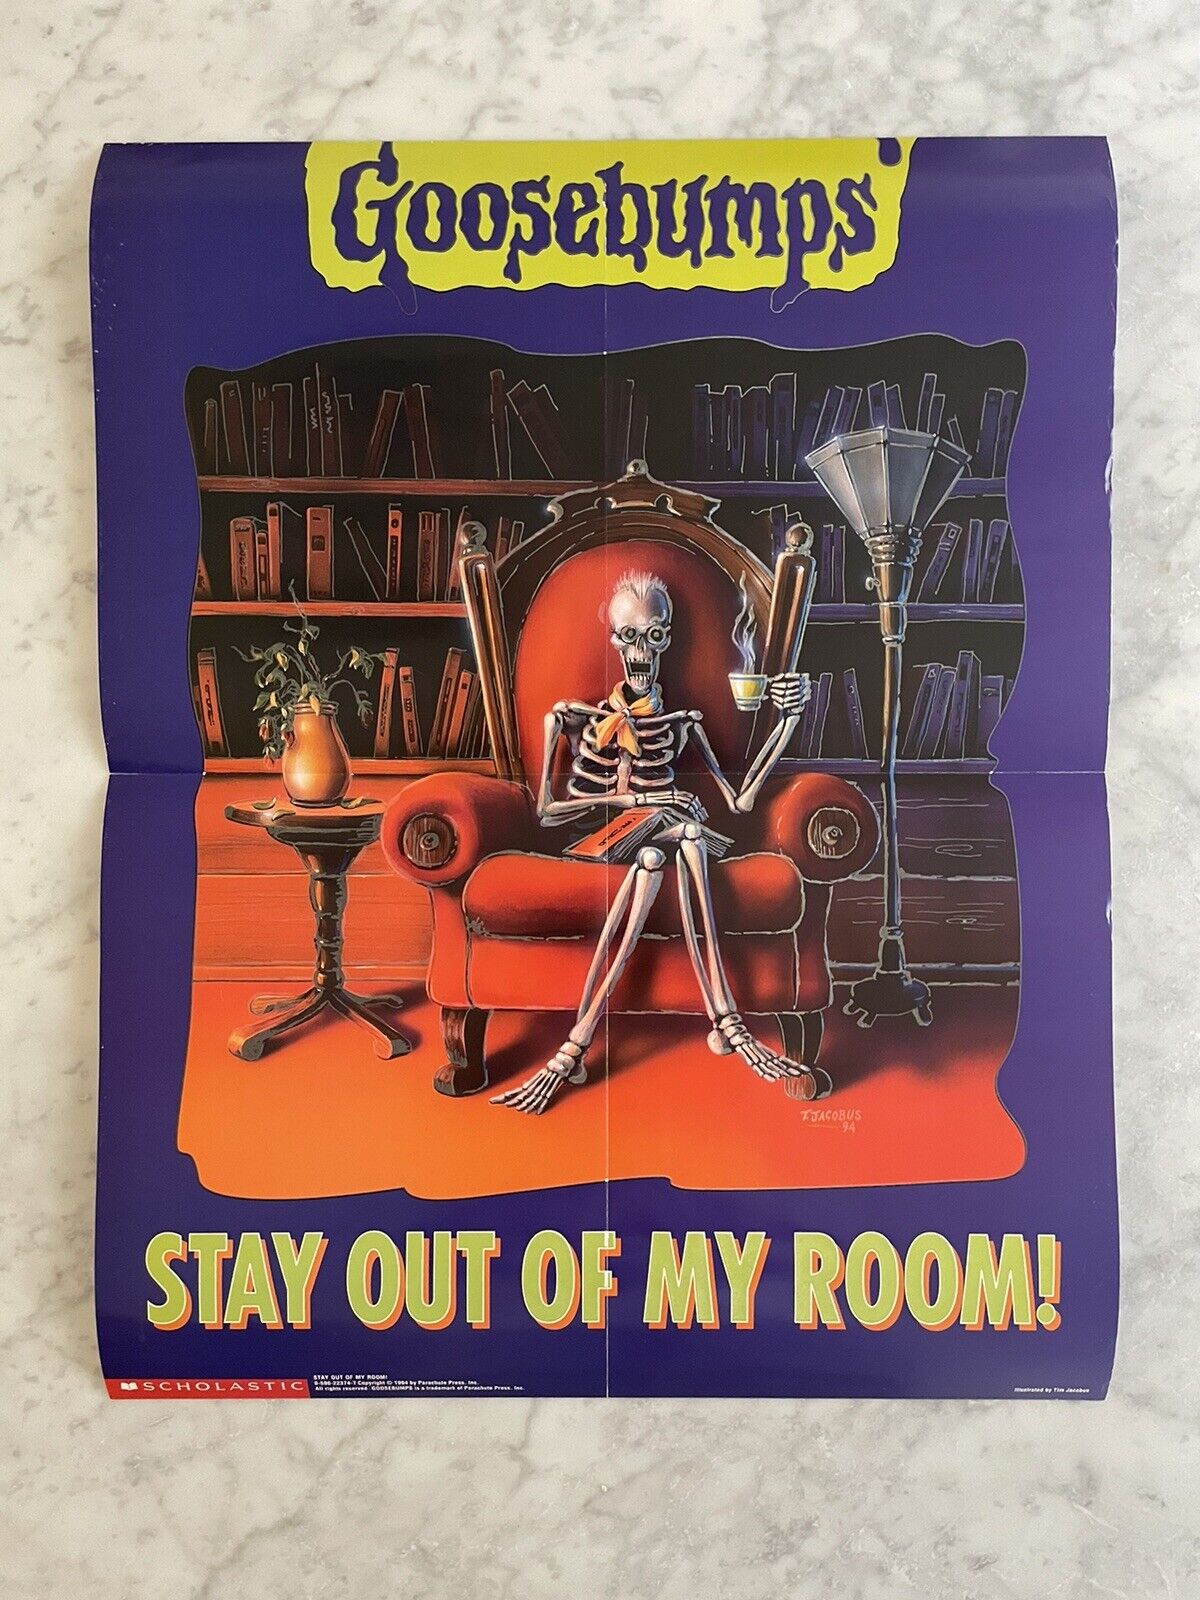 Vintage Goosebumps “Stay Out Of My Room” Glow-in-the-Dark Poster Curly Rare